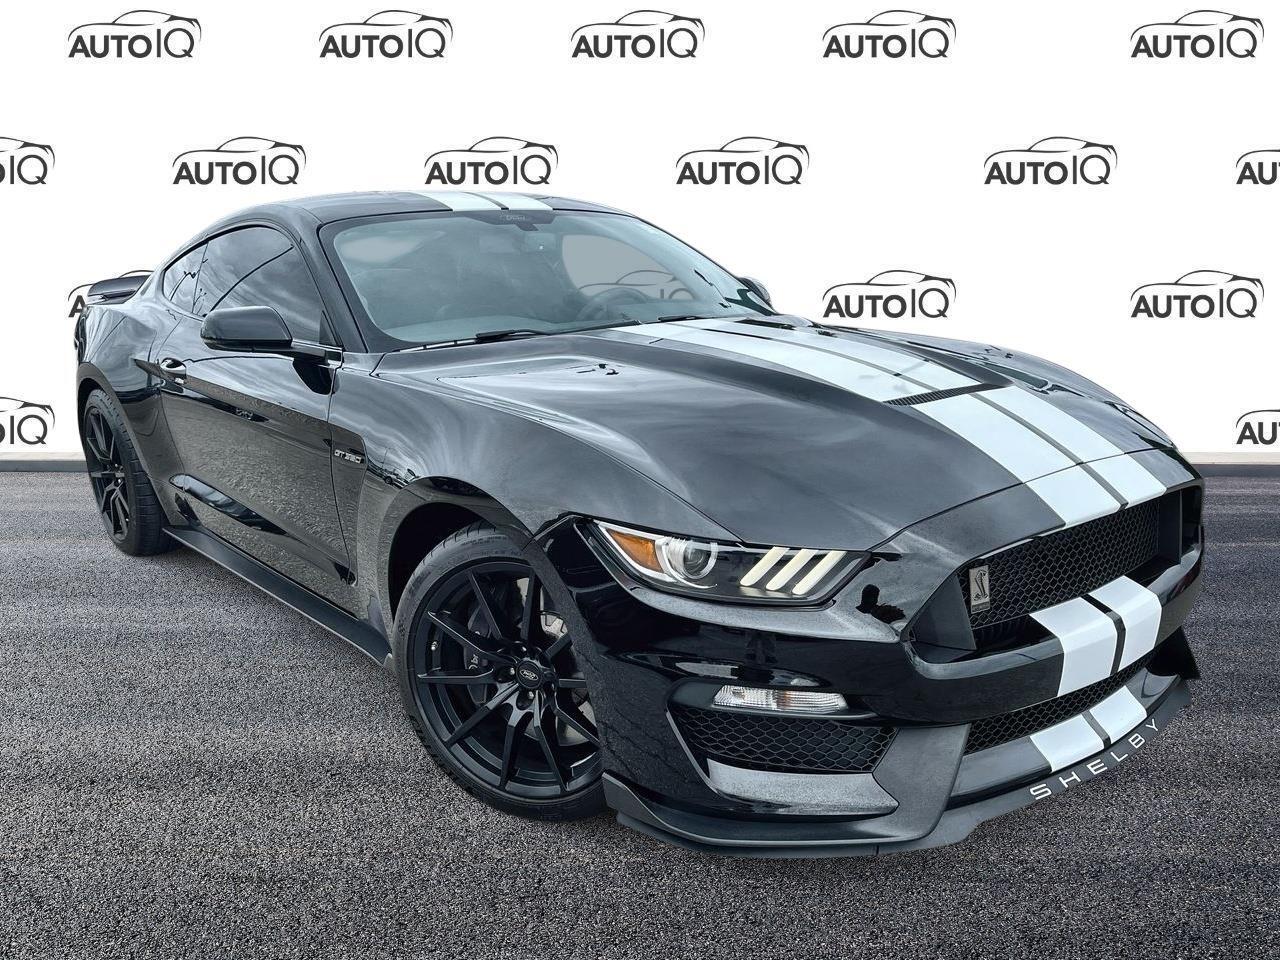 2016 Ford Mustang Shelby 